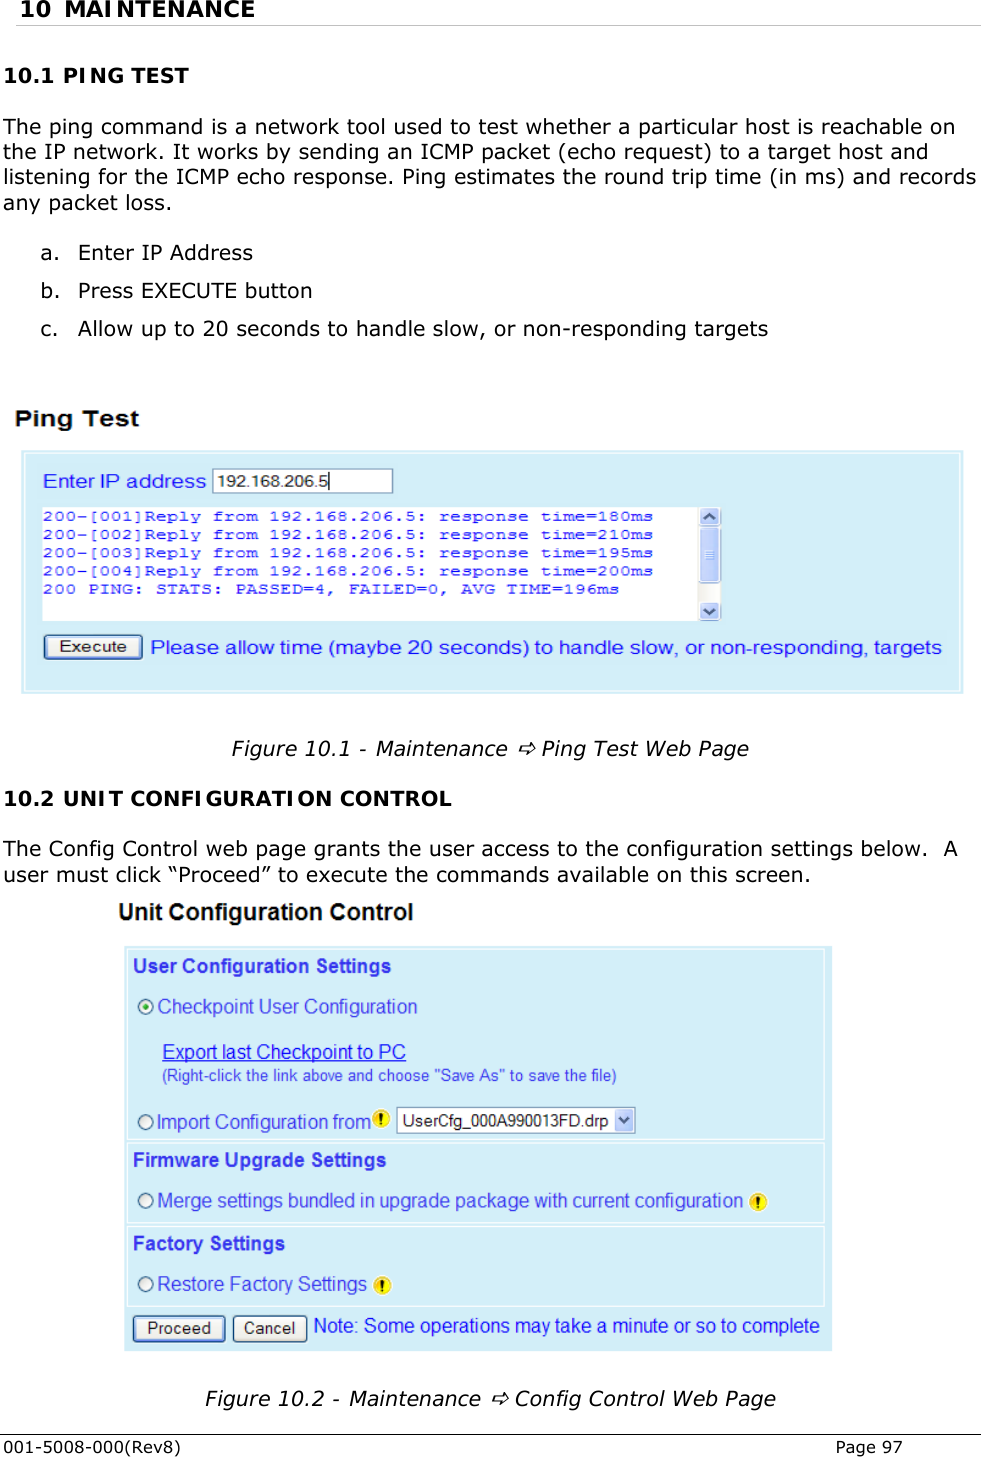  10 MAINTENANCE 10.1 PING TEST The ping command is a network tool used to test whether a particular host is reachable on P packet (echo request) to a target host and li tening for the ICMP echo response. Ping estimates the round trip time (in ms) and records  b. Press EXECUTE button c. Allow up to 20 seconds to handle slow, or non-responding targets the IP network. It works by sending an ICMsany packet loss.  a. Enter IP Address   Figure 10.1 - Maintenance D Ping Test Web Page 10.2 UNIT CONFIGURATION CONTROL The Config Control web page grants the user access to the configuration settings below.  A user must click “Proceed” to execute the commands available on this screen.  Figure 10.2 - Maintenance D Config Control Web Page 001-5008-000(Rev8)   Page 97 